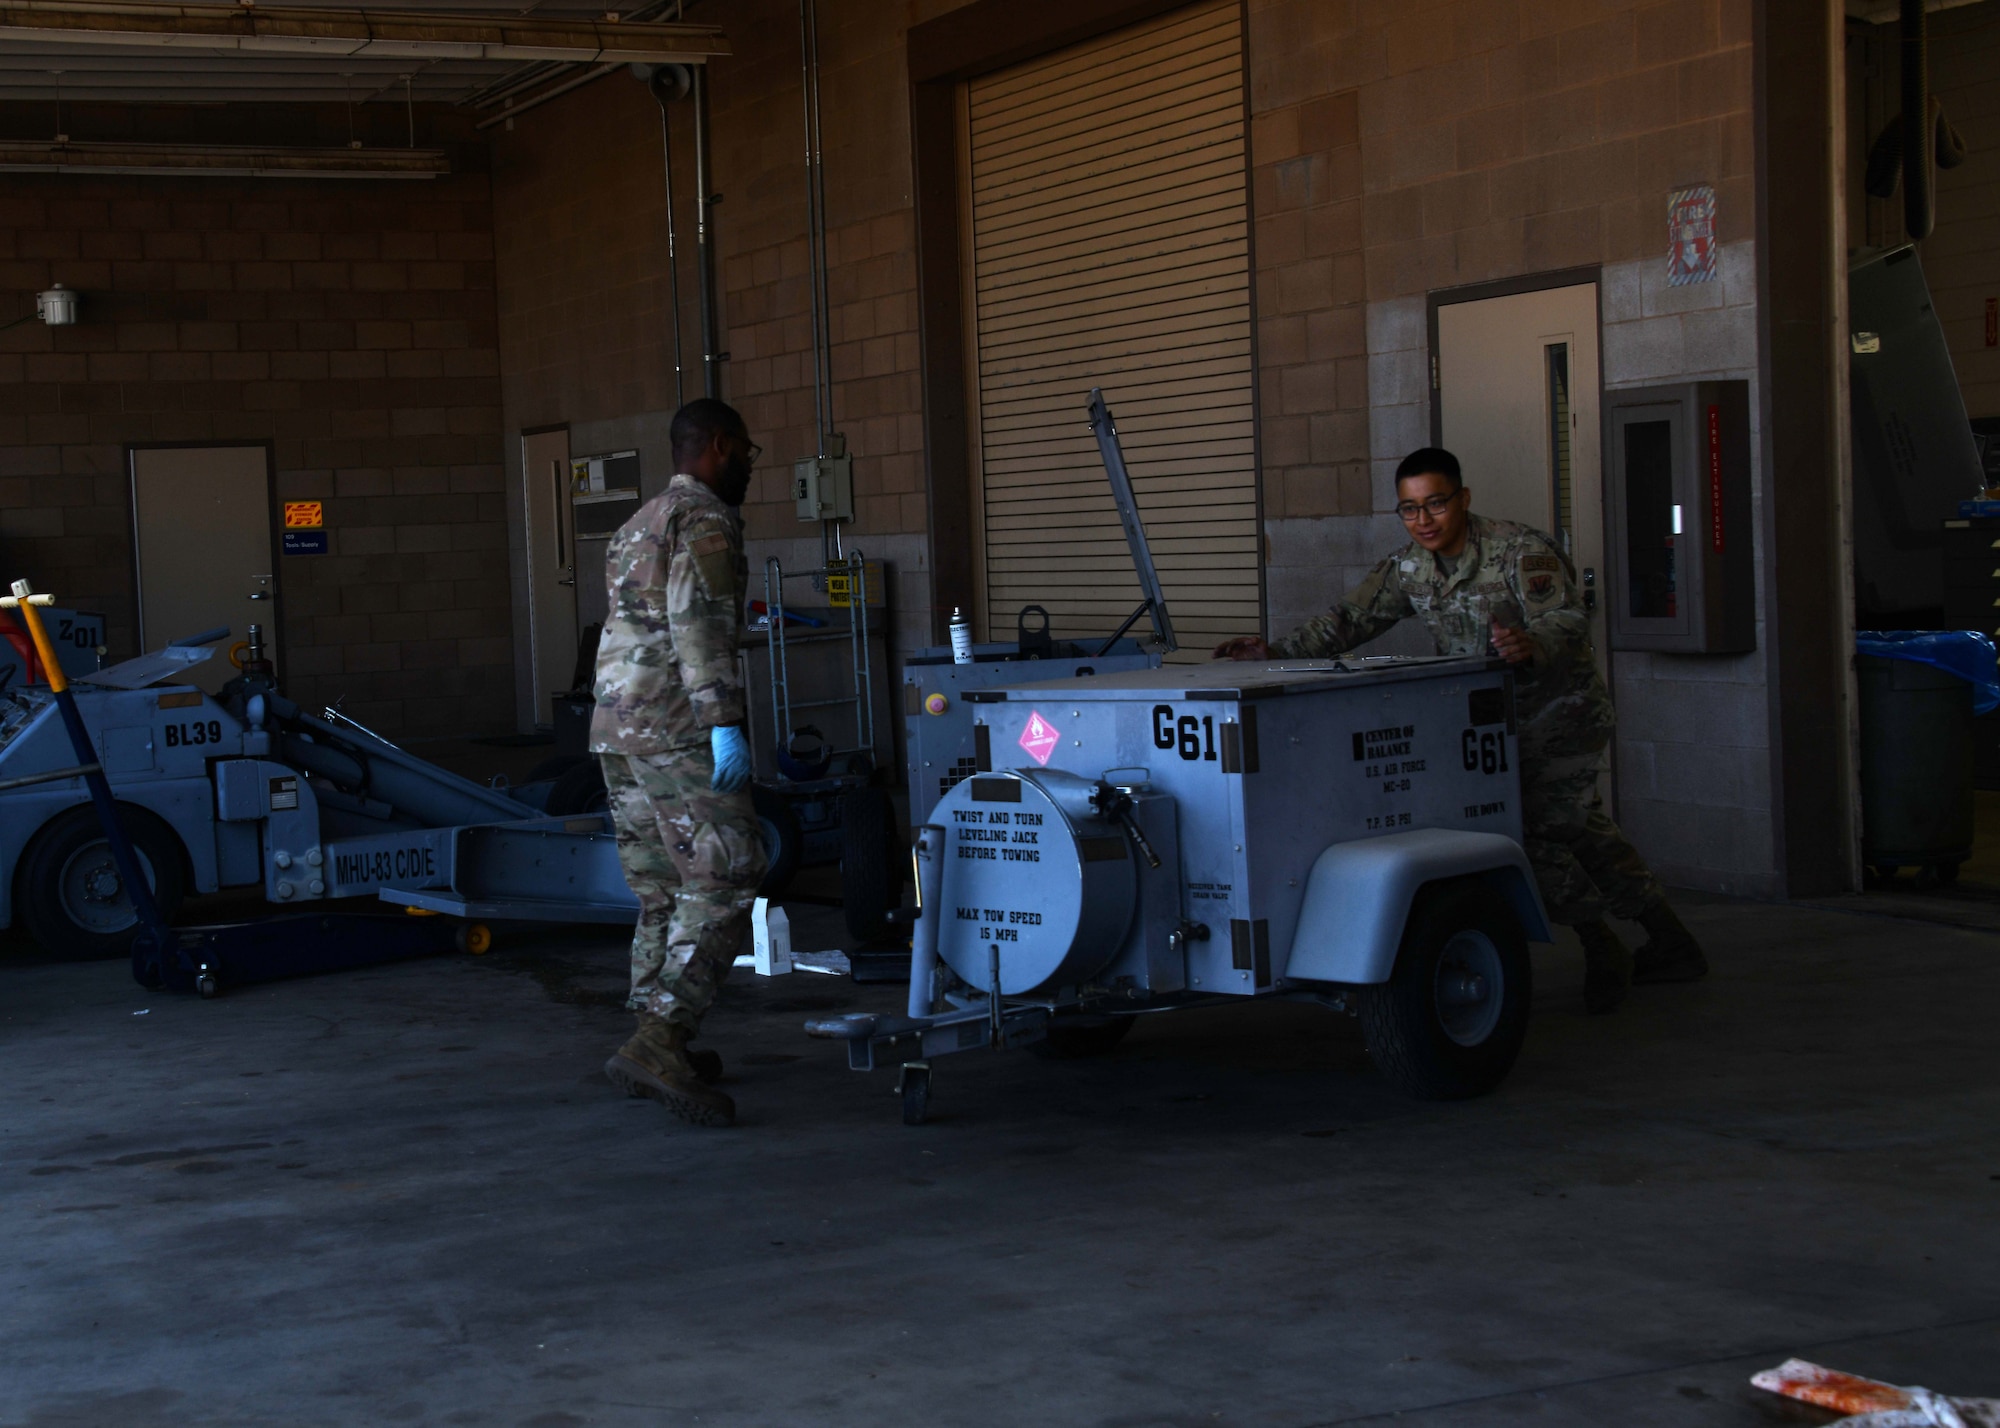 A US service member wearing green camo pushes a metal cart from the right of the frame to the left